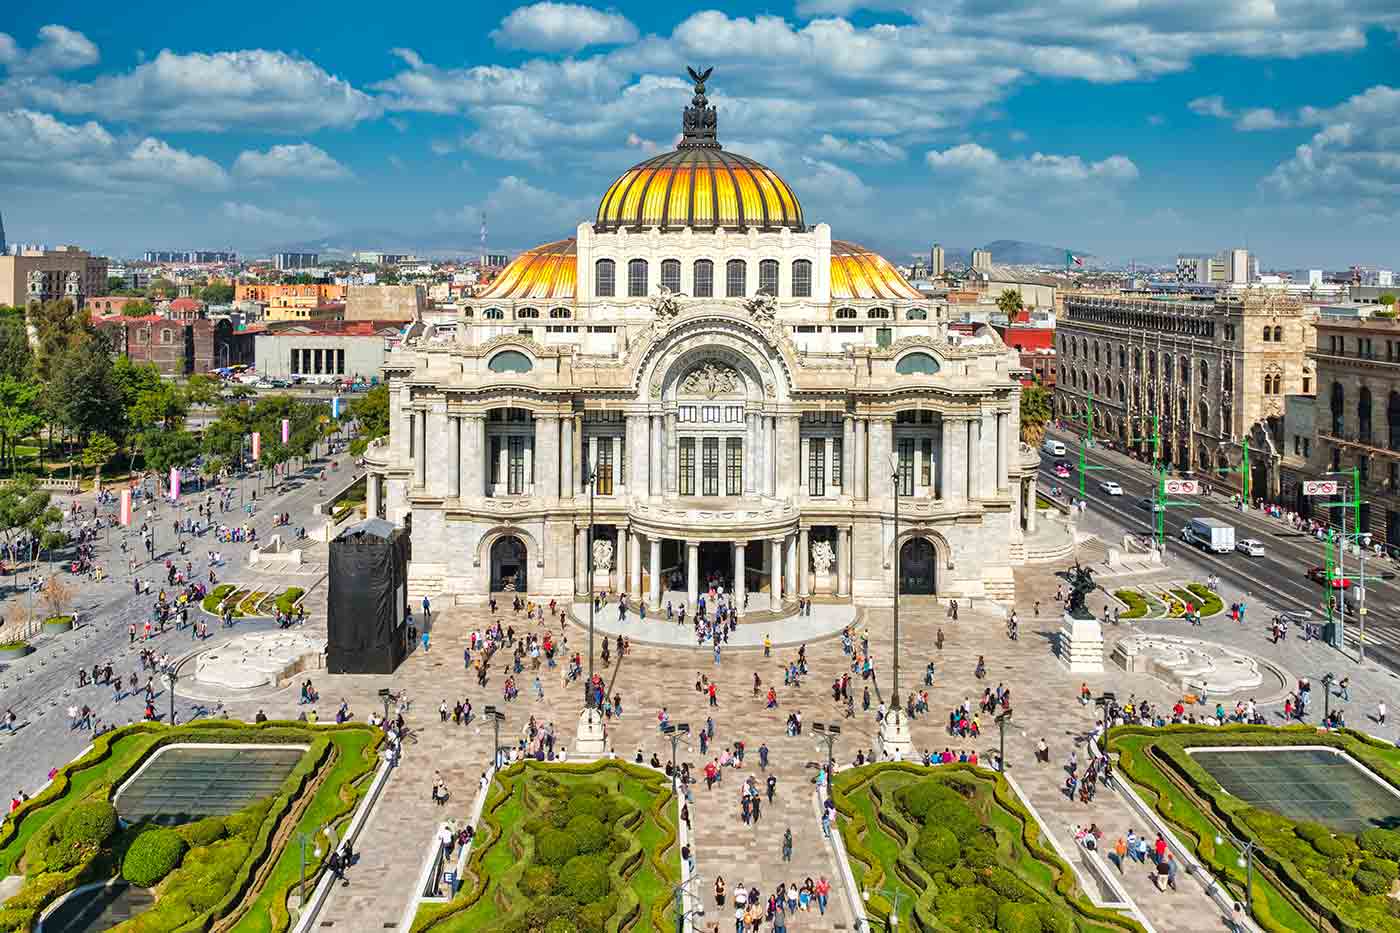 Mexico City Attractions - Top Things to Do & See in Mexico City